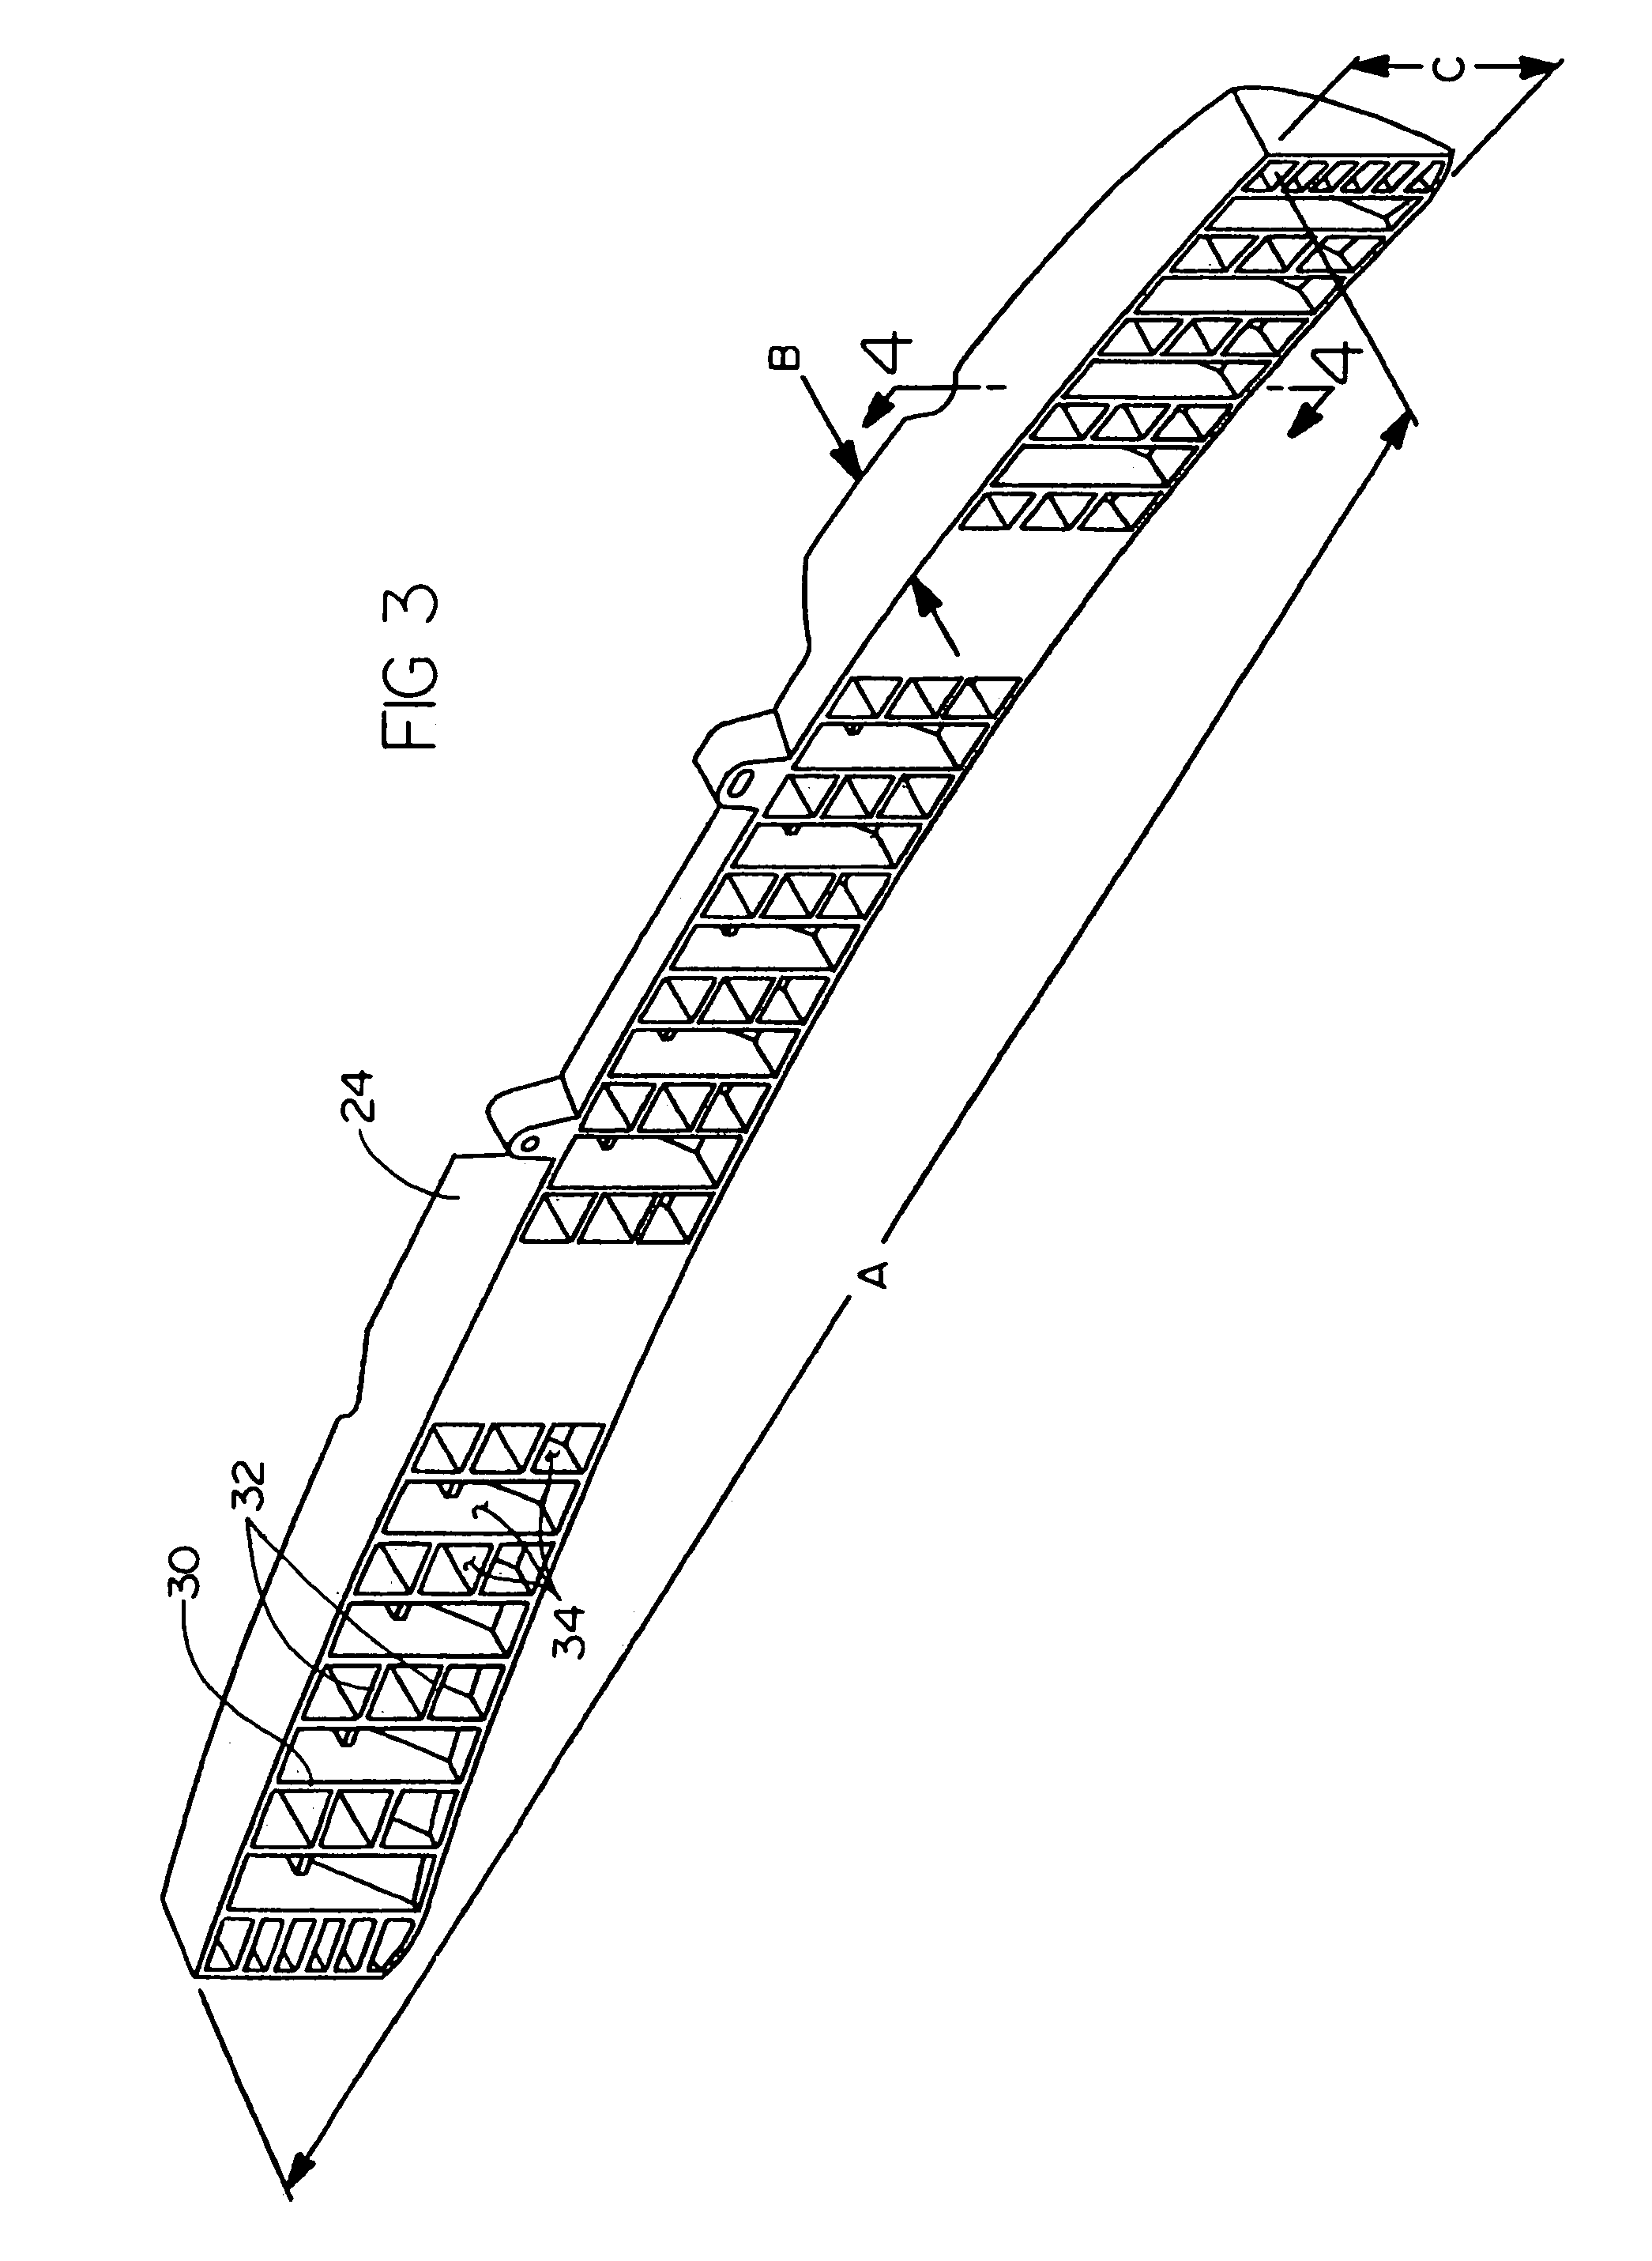 Molded foam vehicle energy absorbing device and method of manufacture